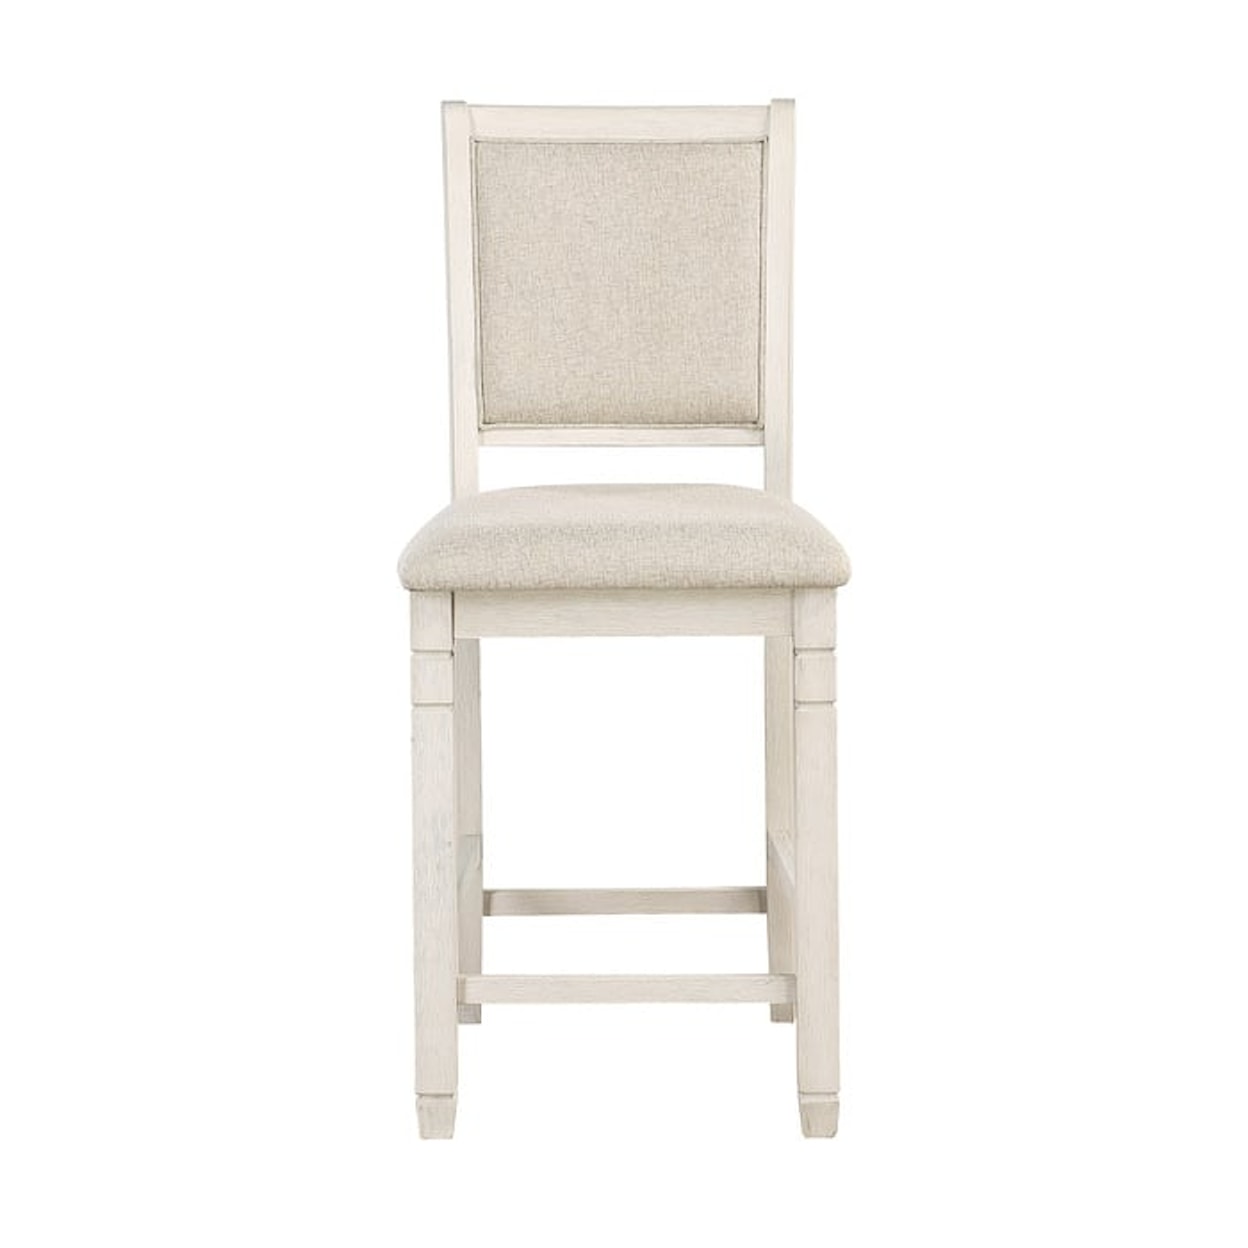 Homelegance Asher Counter Height Chair